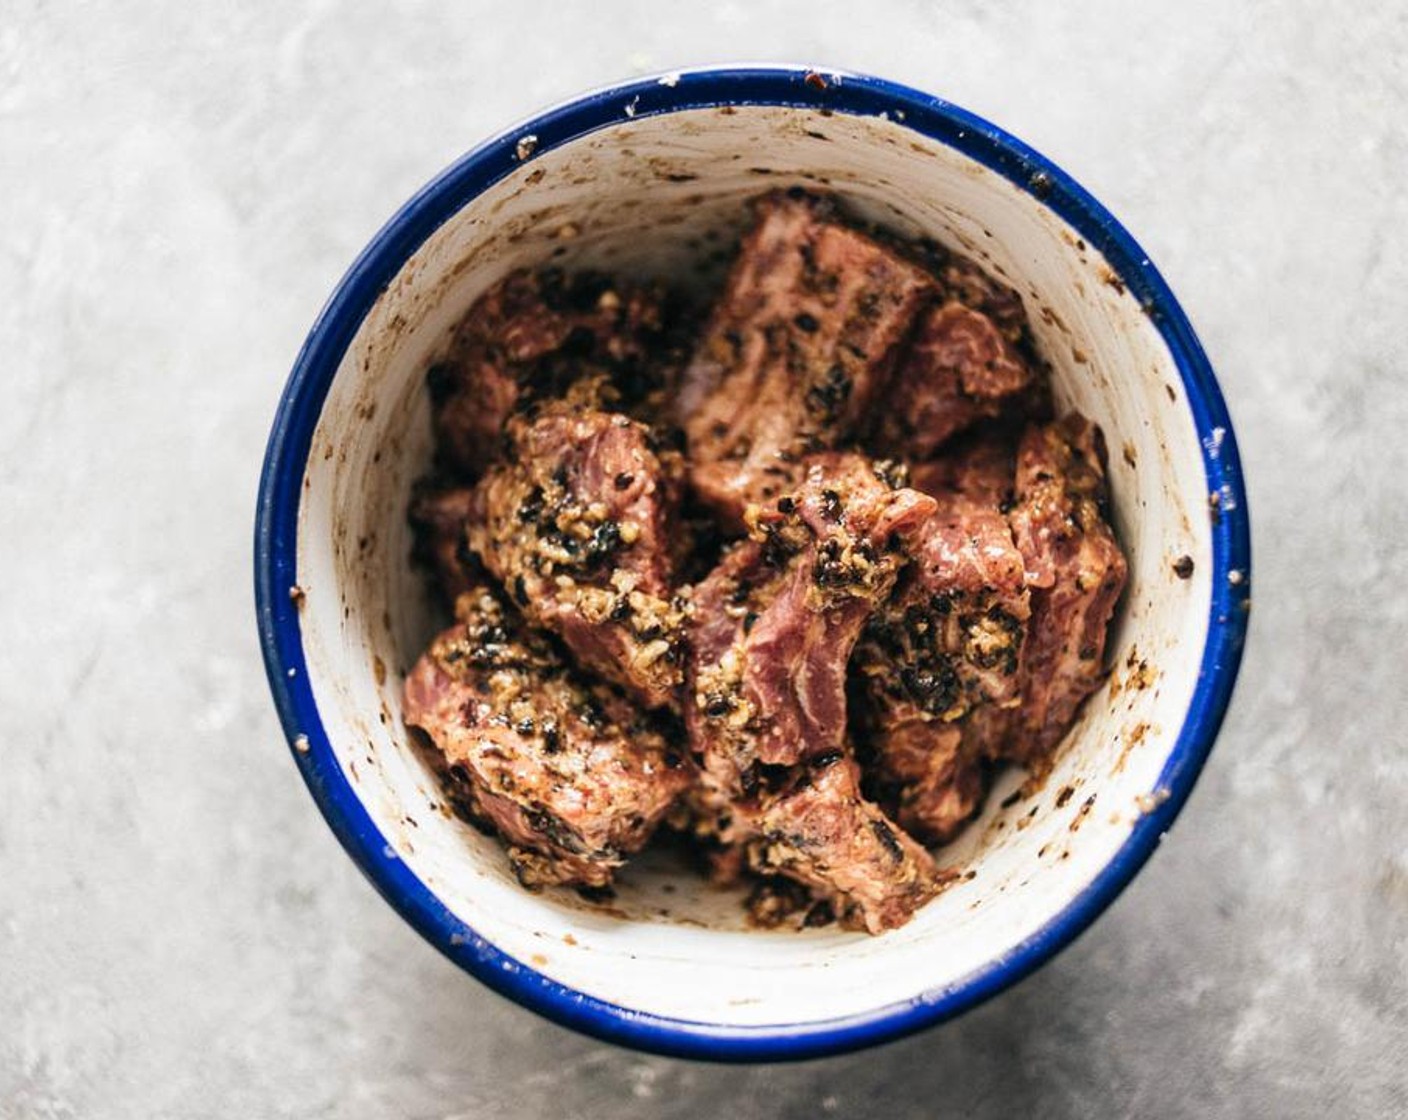 step 2 Combine Pork Baby Back Ribs (1 lb) with the marinade sauce in a big bowl and mix well. Marinate at room temperature for a minimum of 30 minutes or in the fridge, up to overnight.